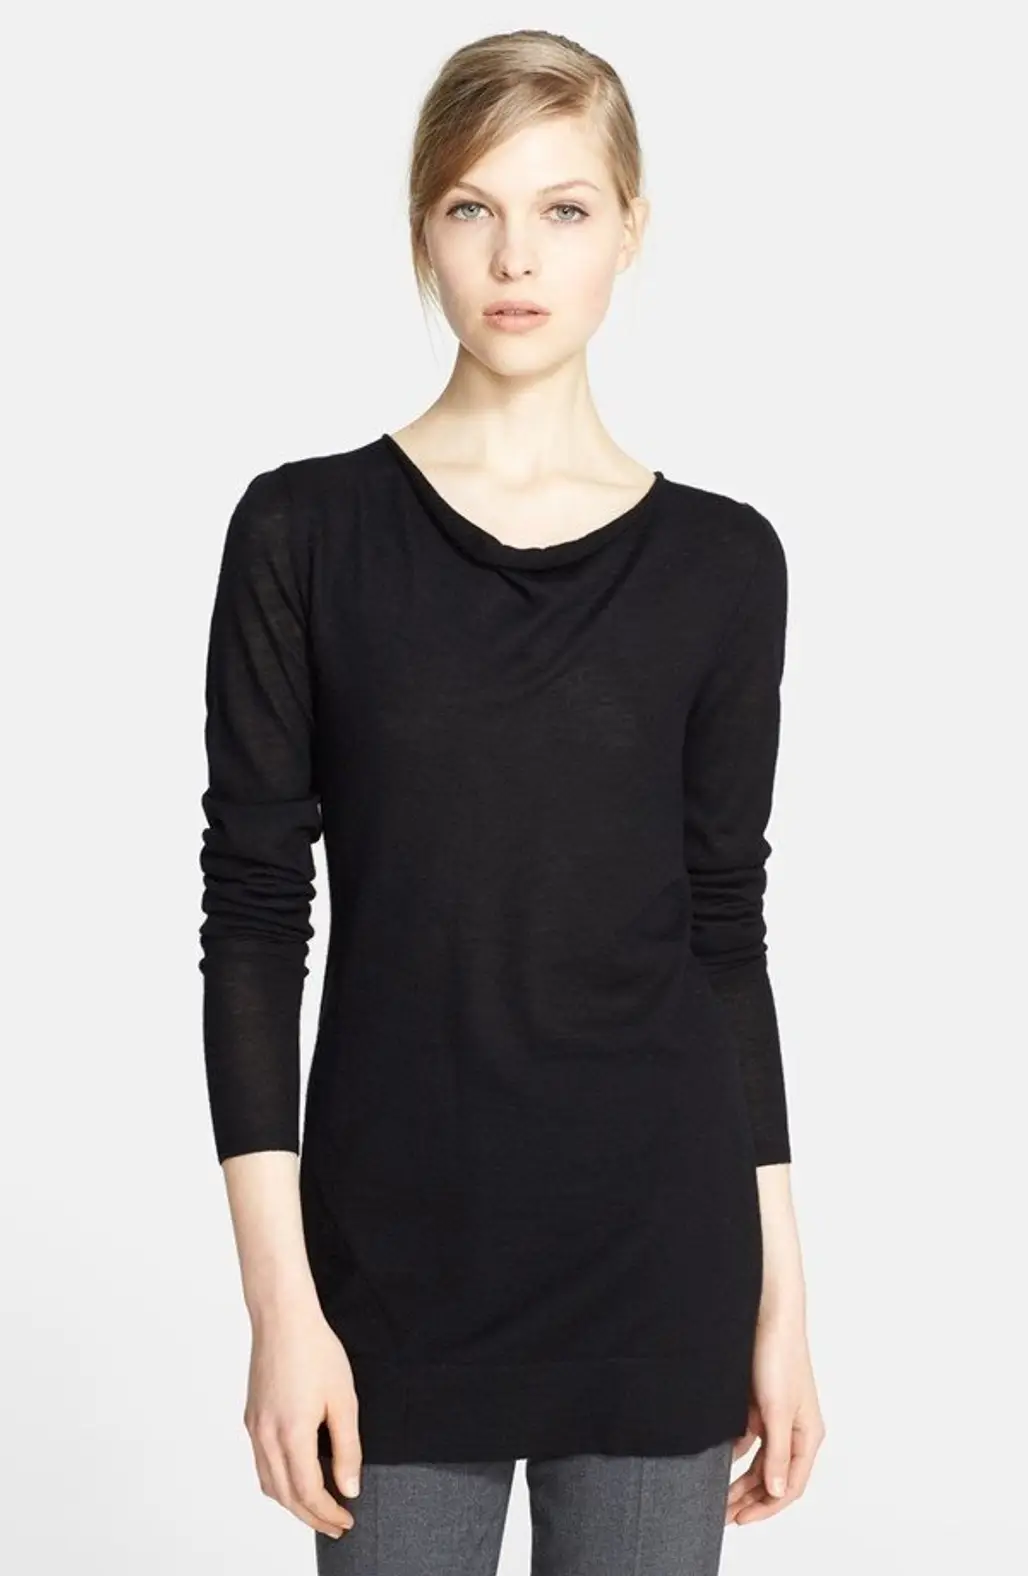 Drape Neck Cashmere Sweater by Nordstrom Signature